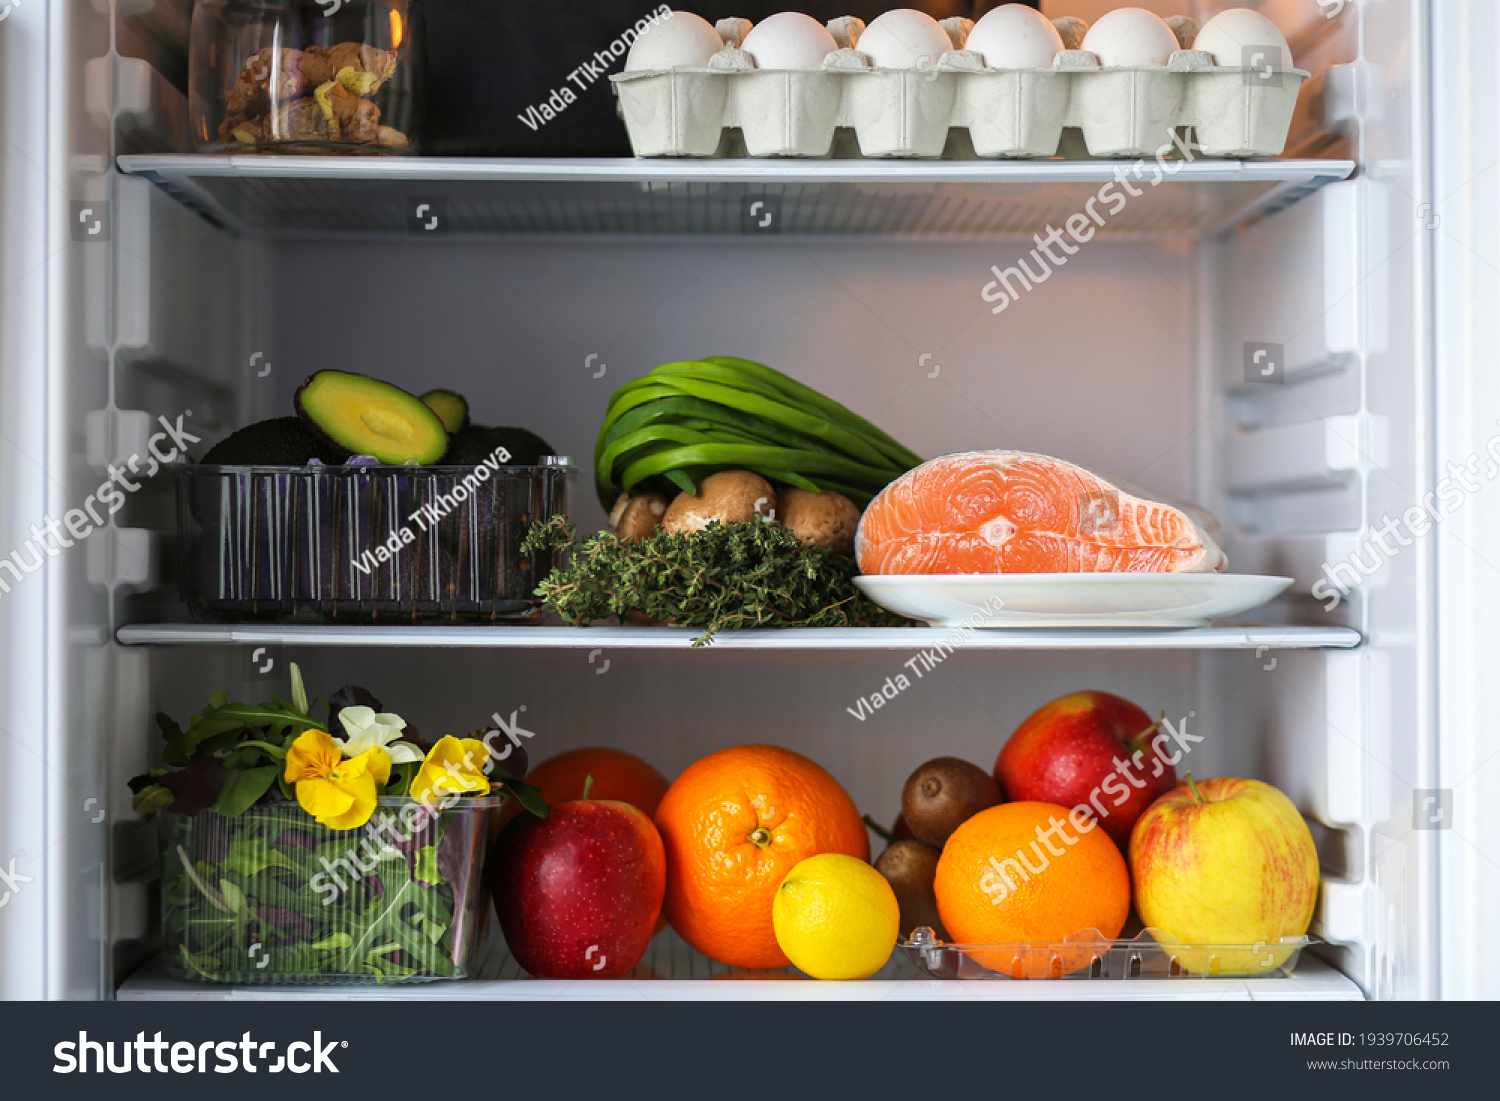 Open fridge with healthy food.Products on the shelves.Proper nutrition with red fish, avocado and fruits.Refrigerator with healthy products.Fruits, eggs, fish, avocado, mushrooms, herbs, kiwi, orange. #1939706452